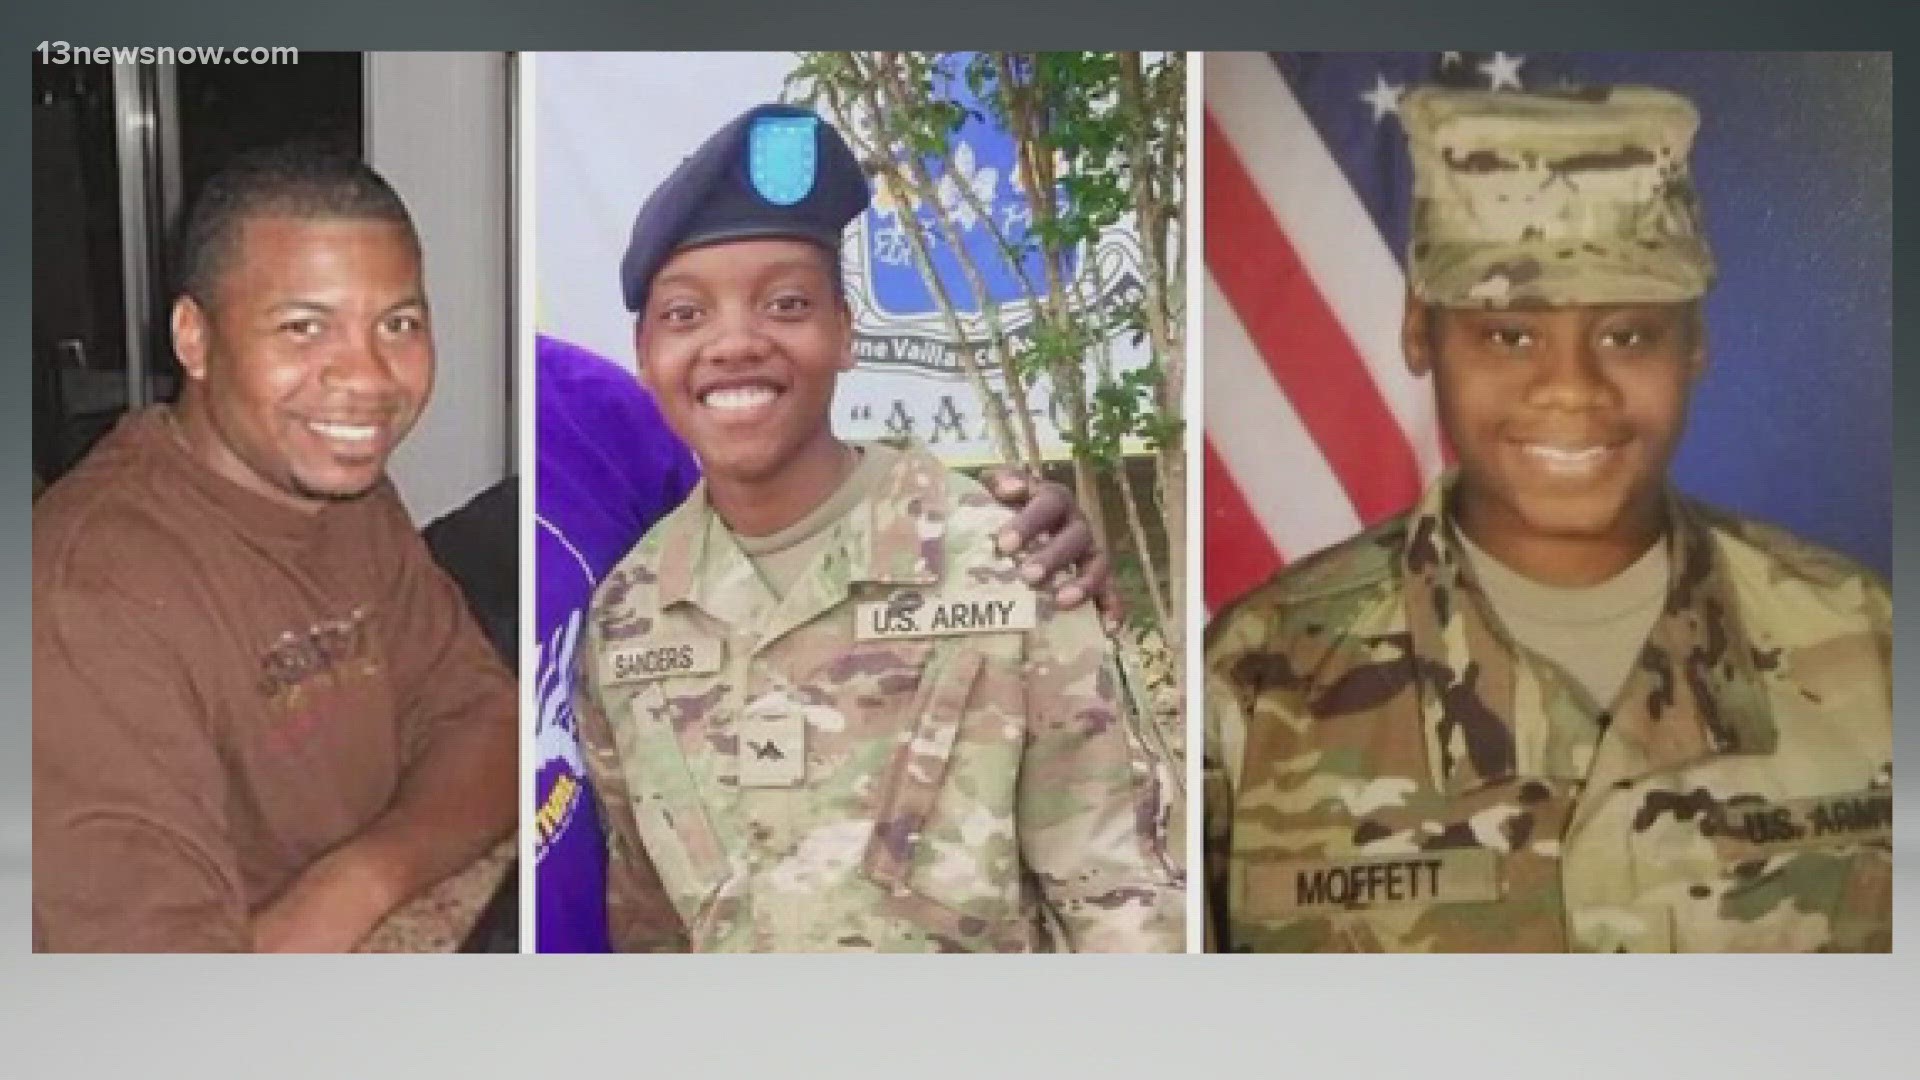 3 Army reservists were killed when a drone hit a housing building on base in Jordan. Now, the U.S. is considering its options for a response.